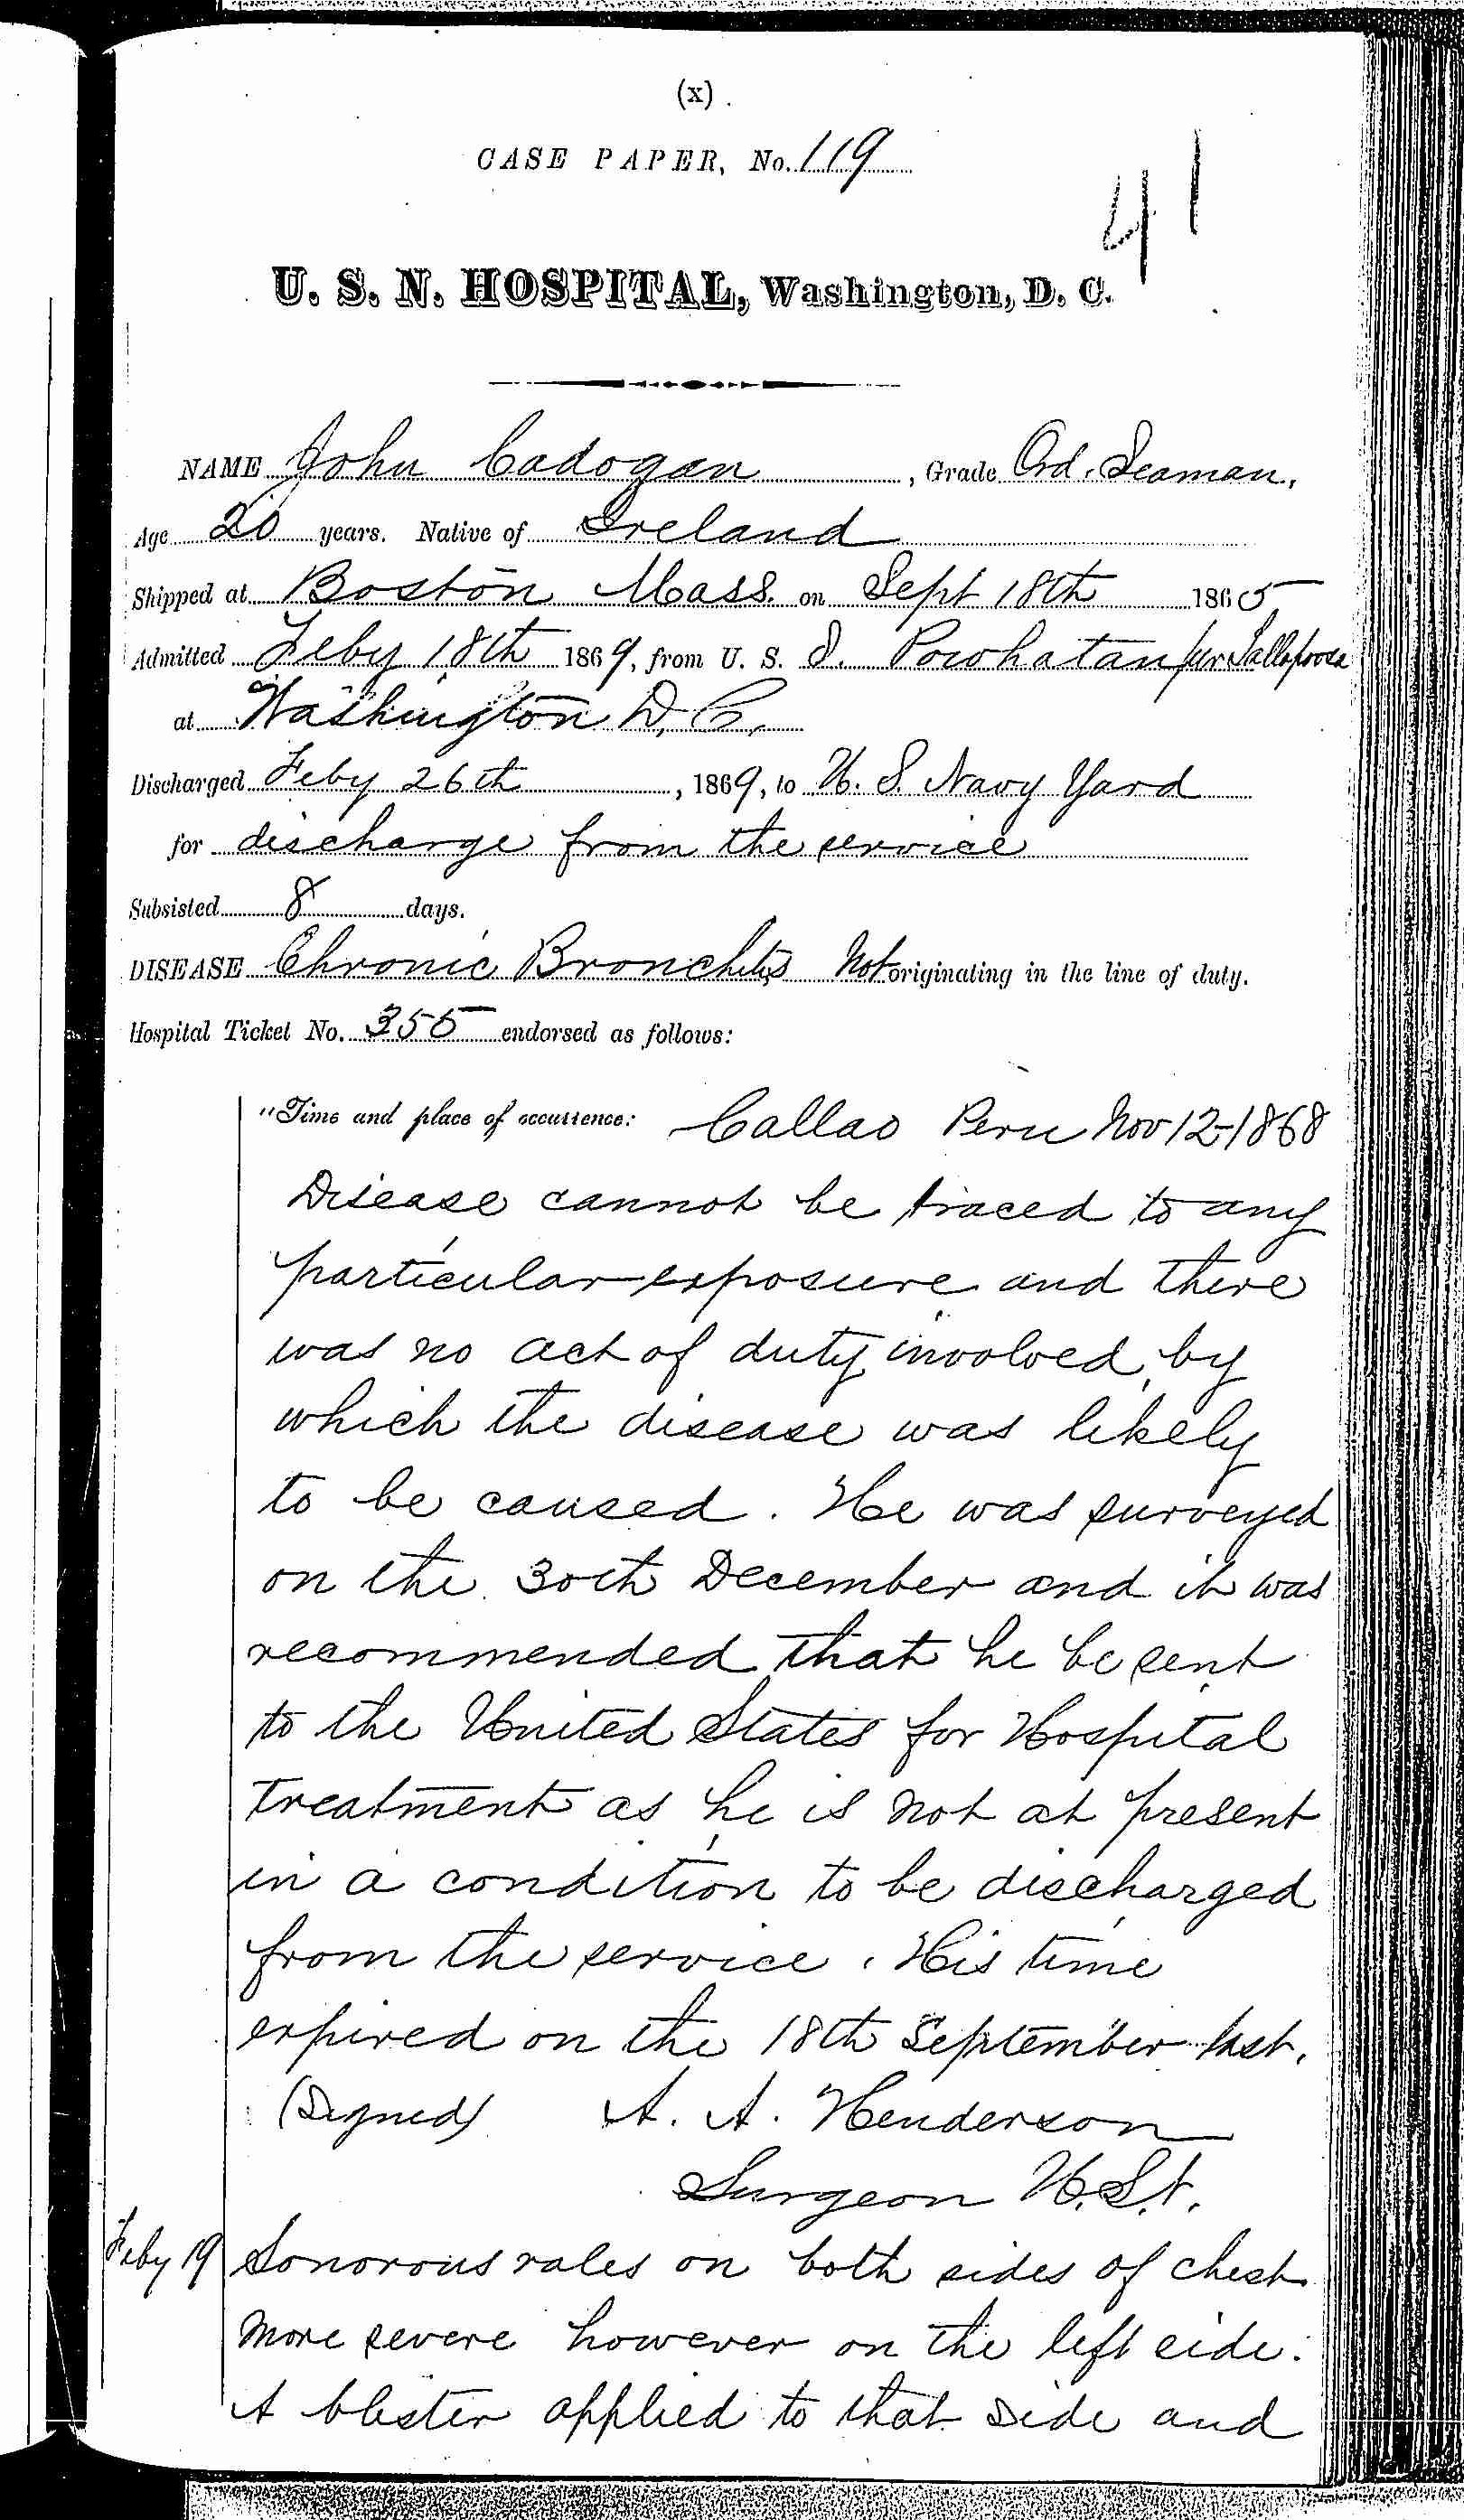 Entry for John Cadogan (page 1 of 3) in the log Hospital Tickets and Case Papers - Naval Hospital - Washington, D.C. - 1868-69